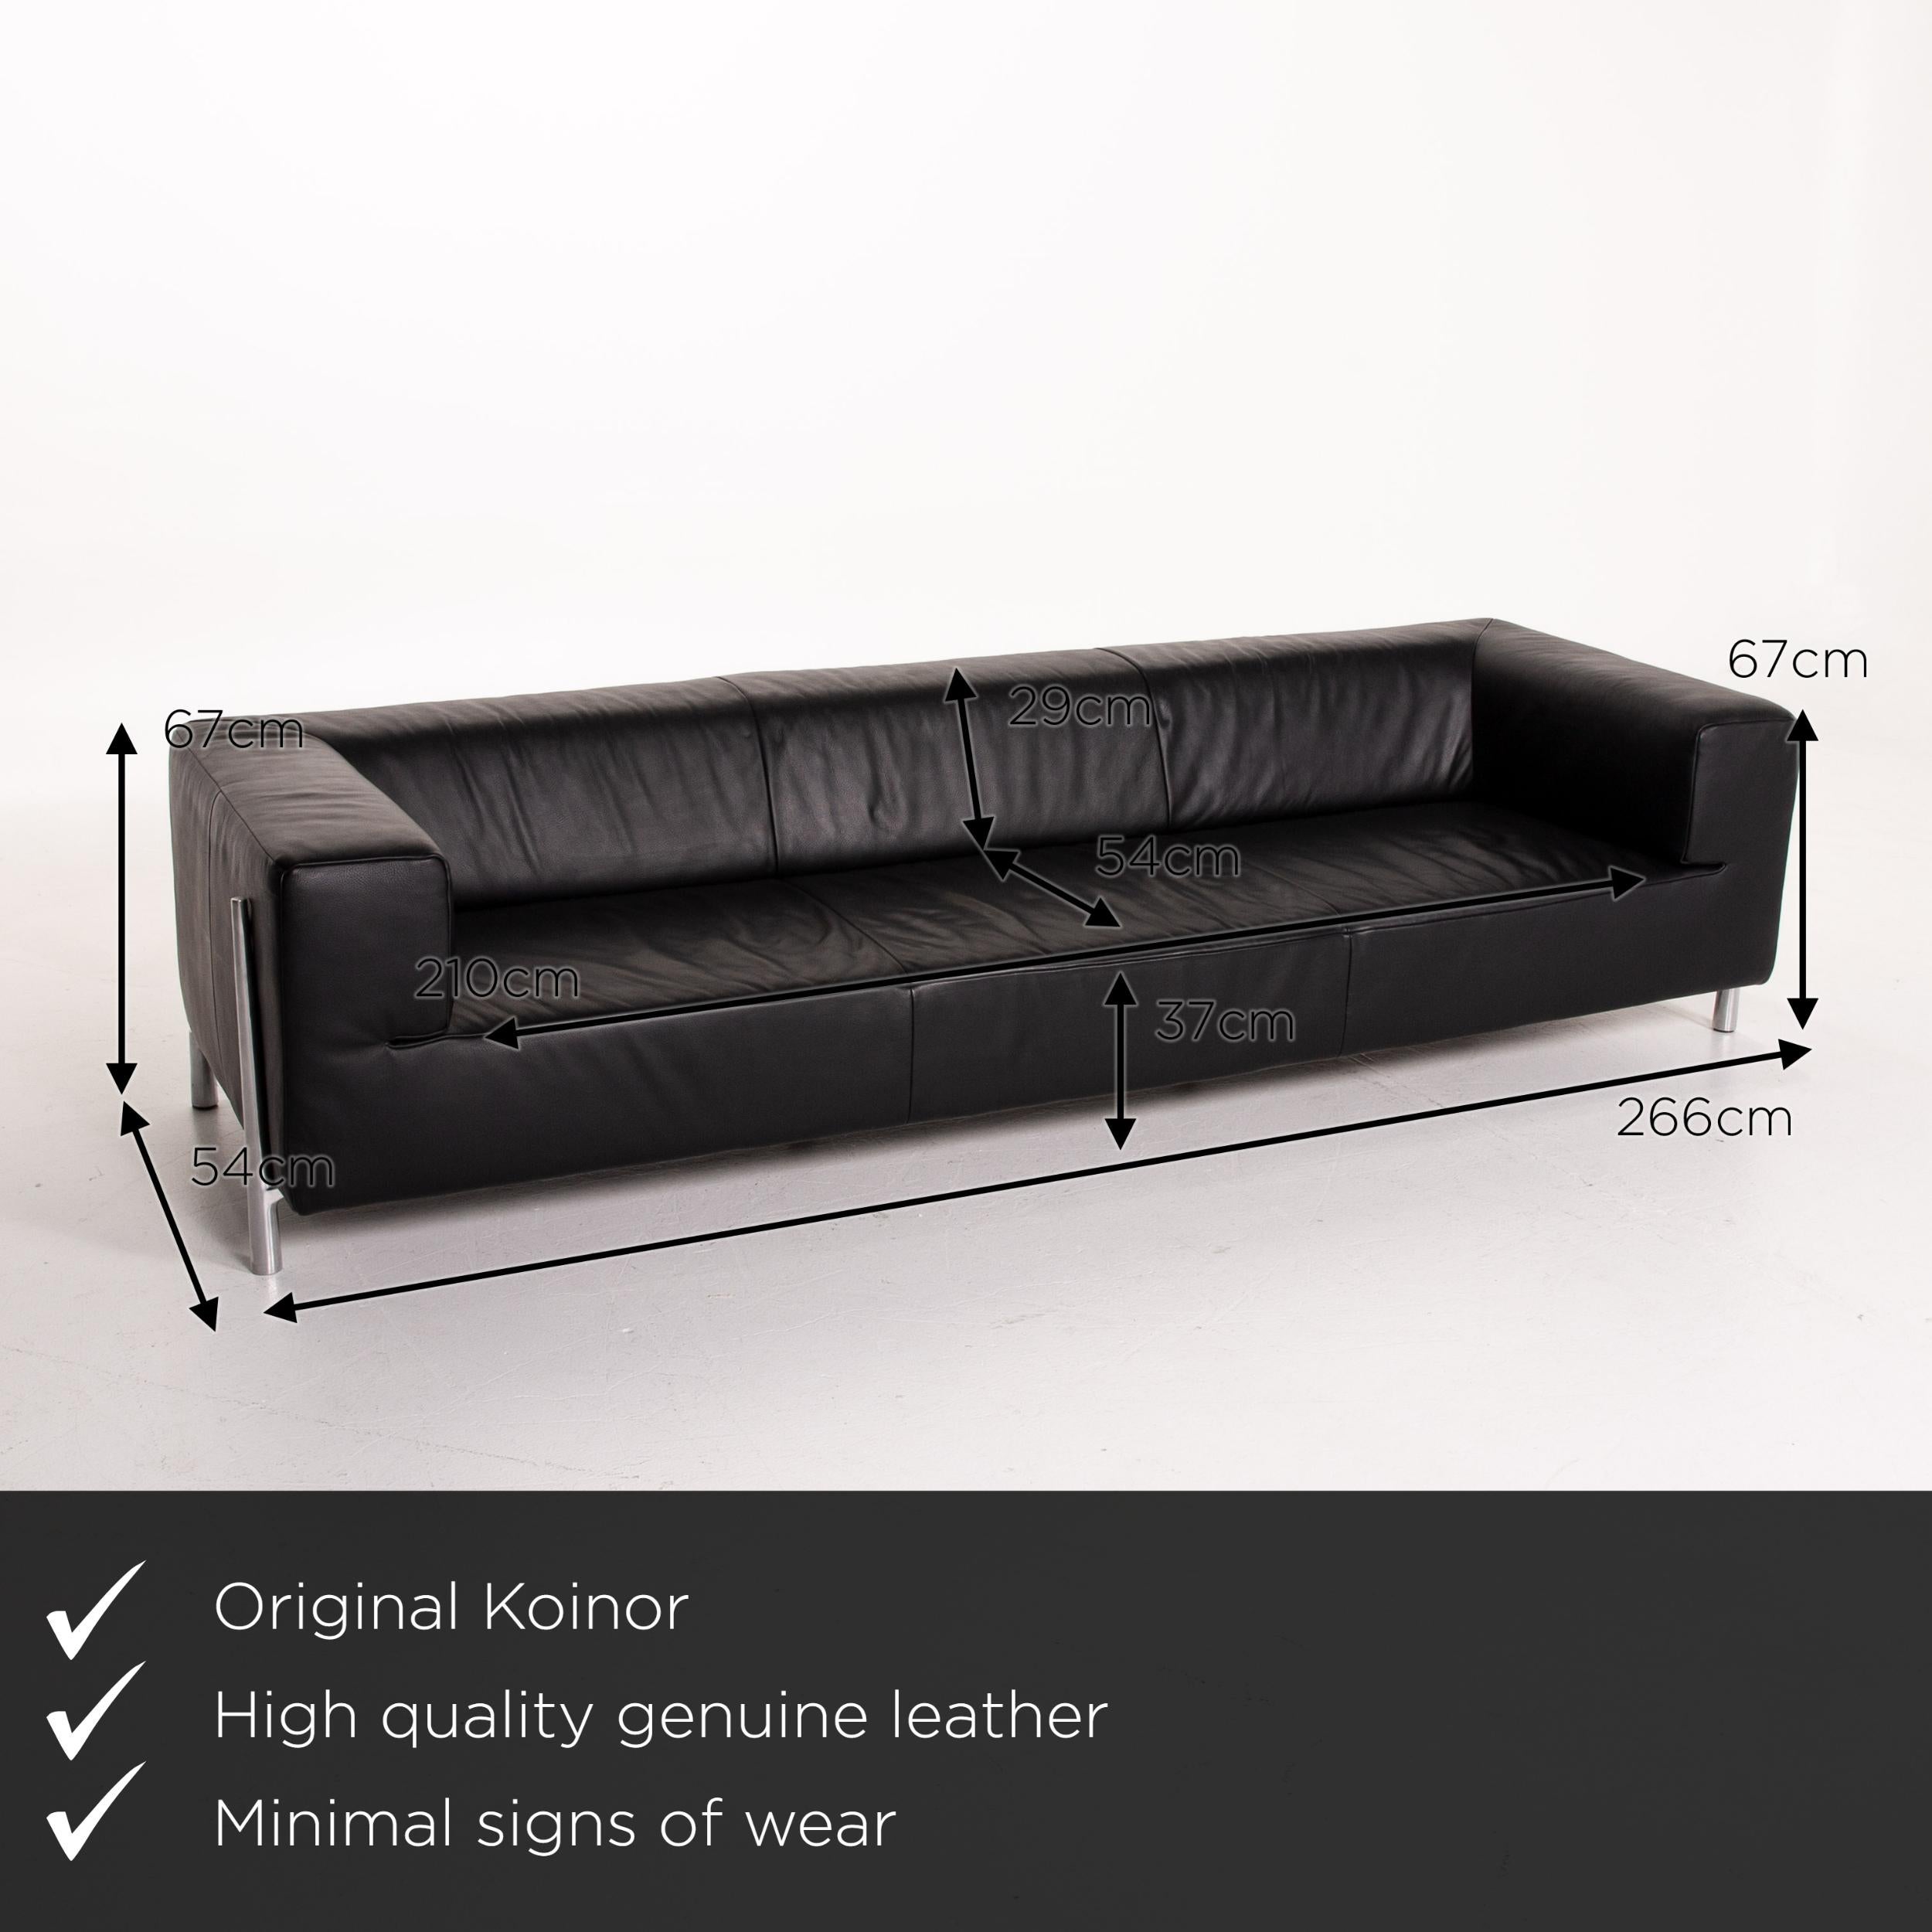 We present to you a Koinor Genesis leather sofa black four-seat couch.


 Product measurements in centimeters:
 

Depth 54
Width 266
Height 67
Seat height 37
Rest height 67
Seat depth 54
Seat width 37
Back height 29.
 